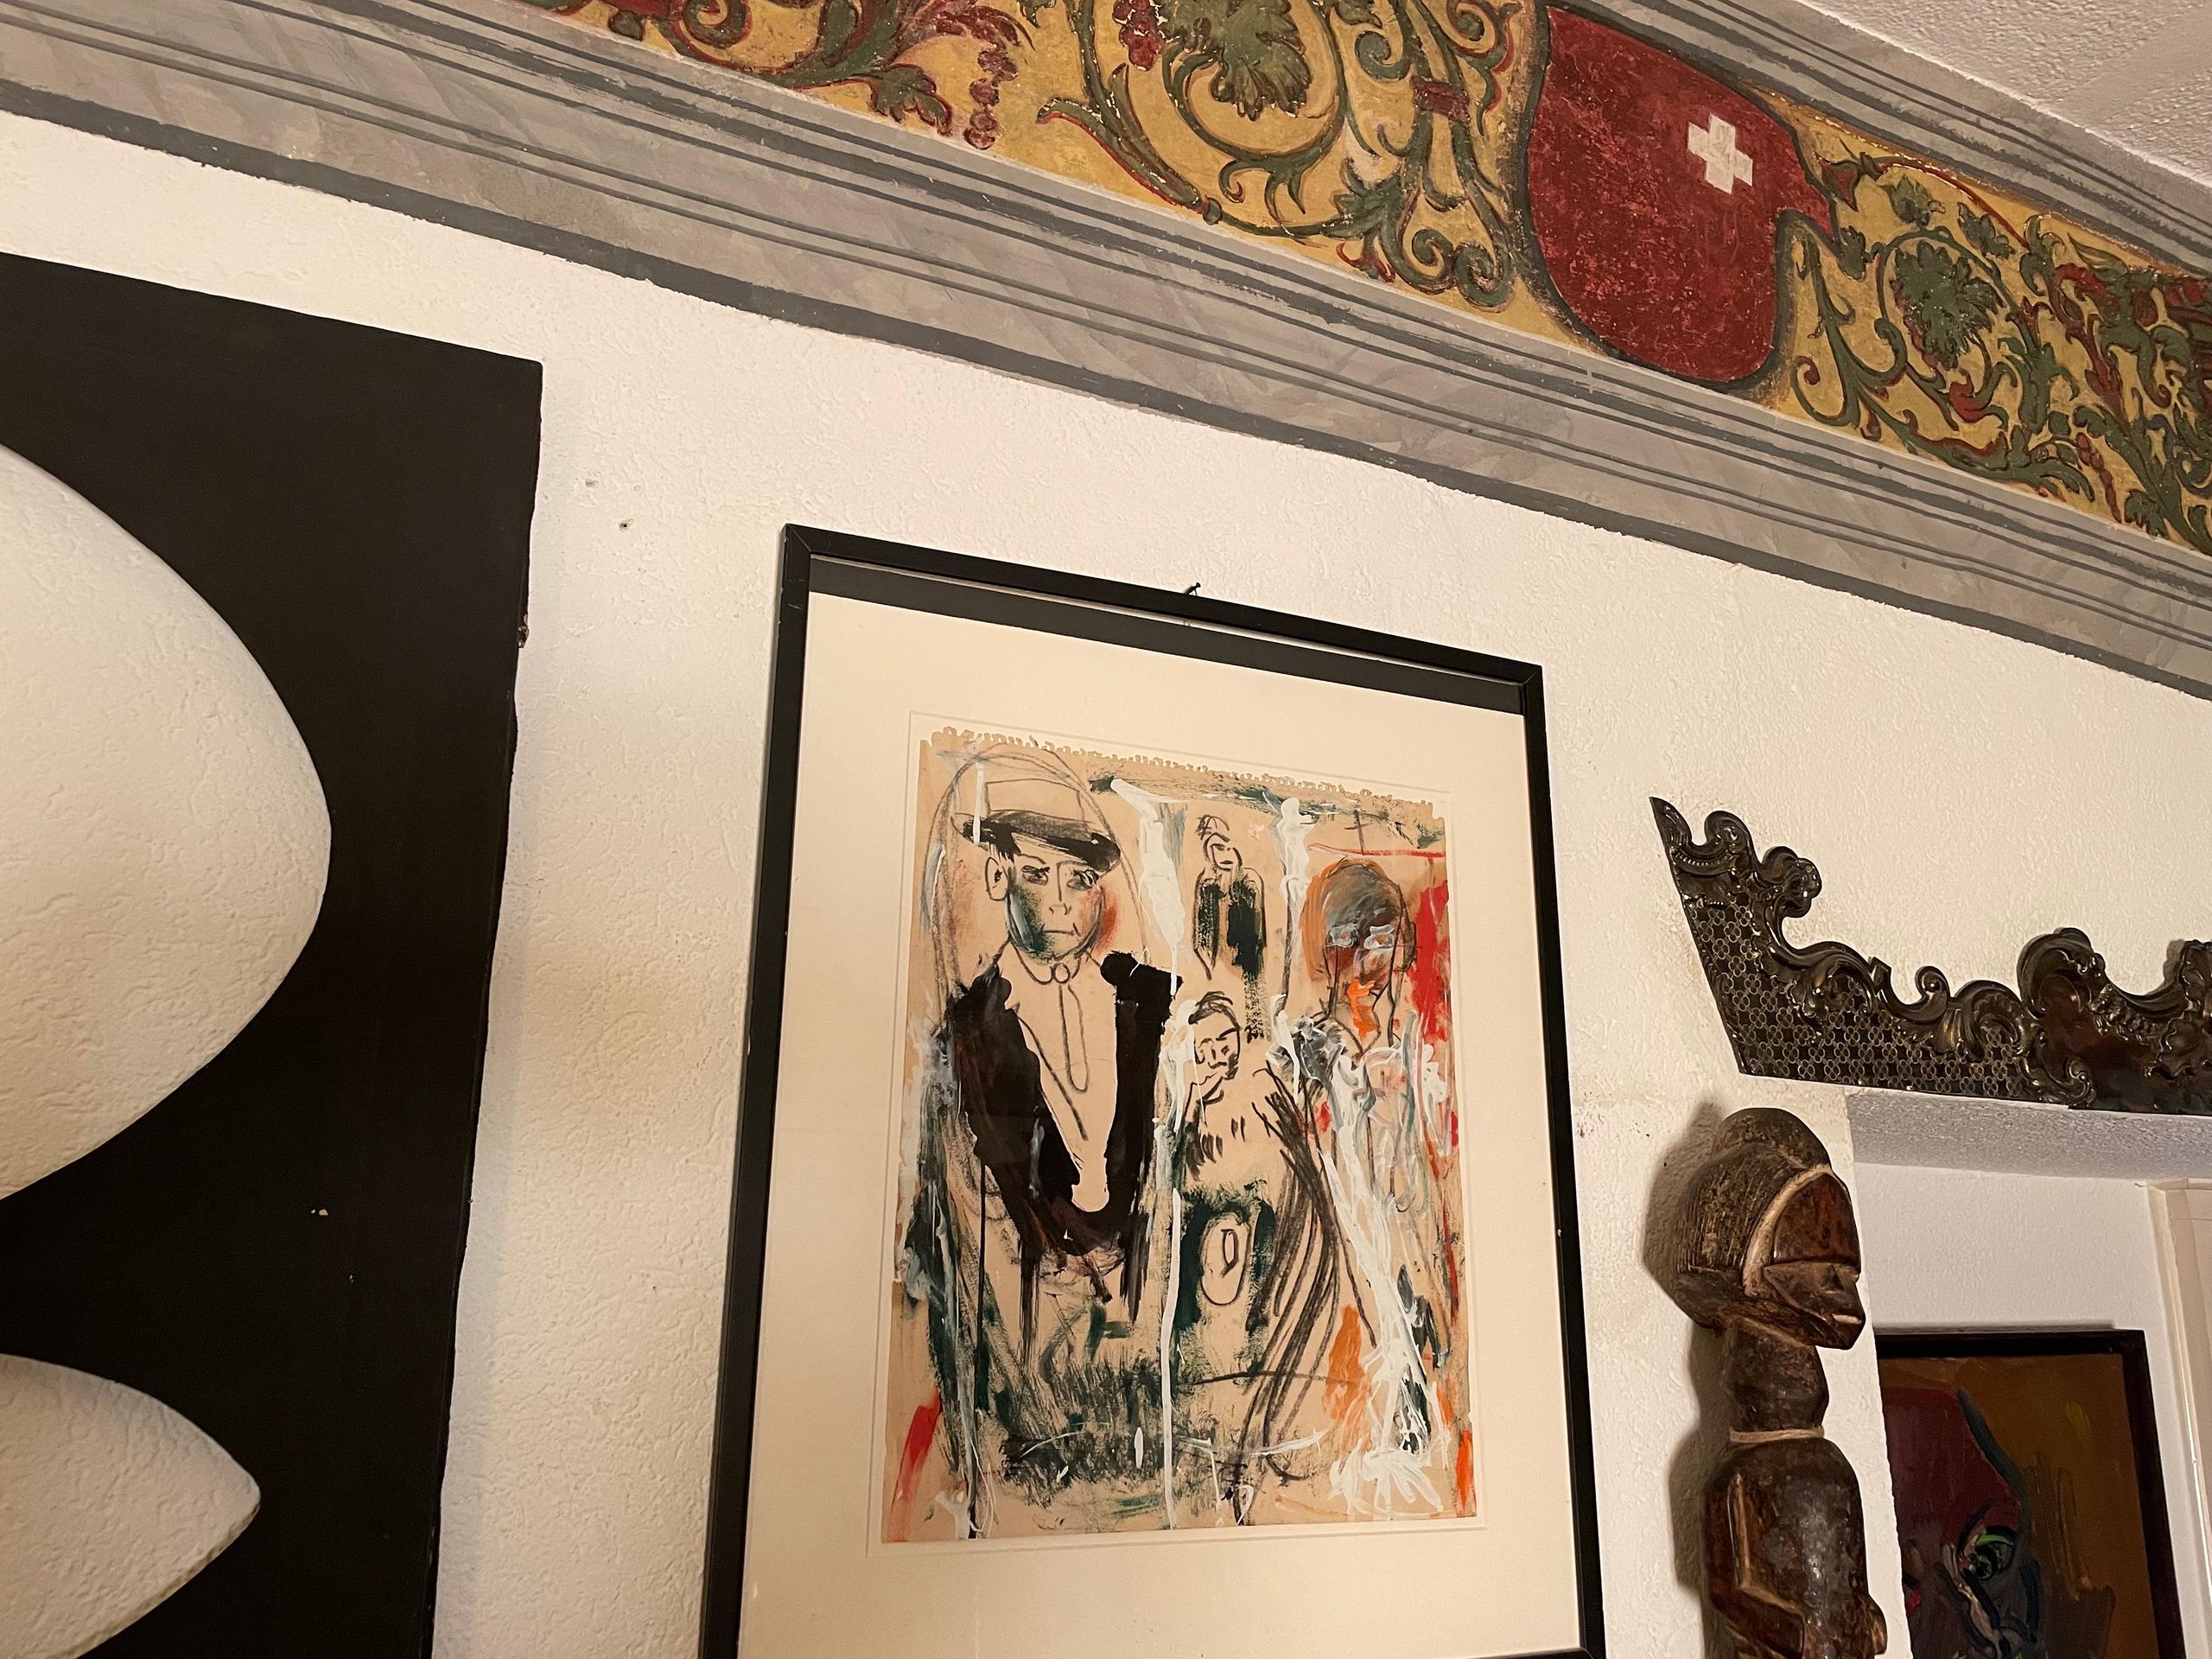 Kerouac painting at the Sciolli residence